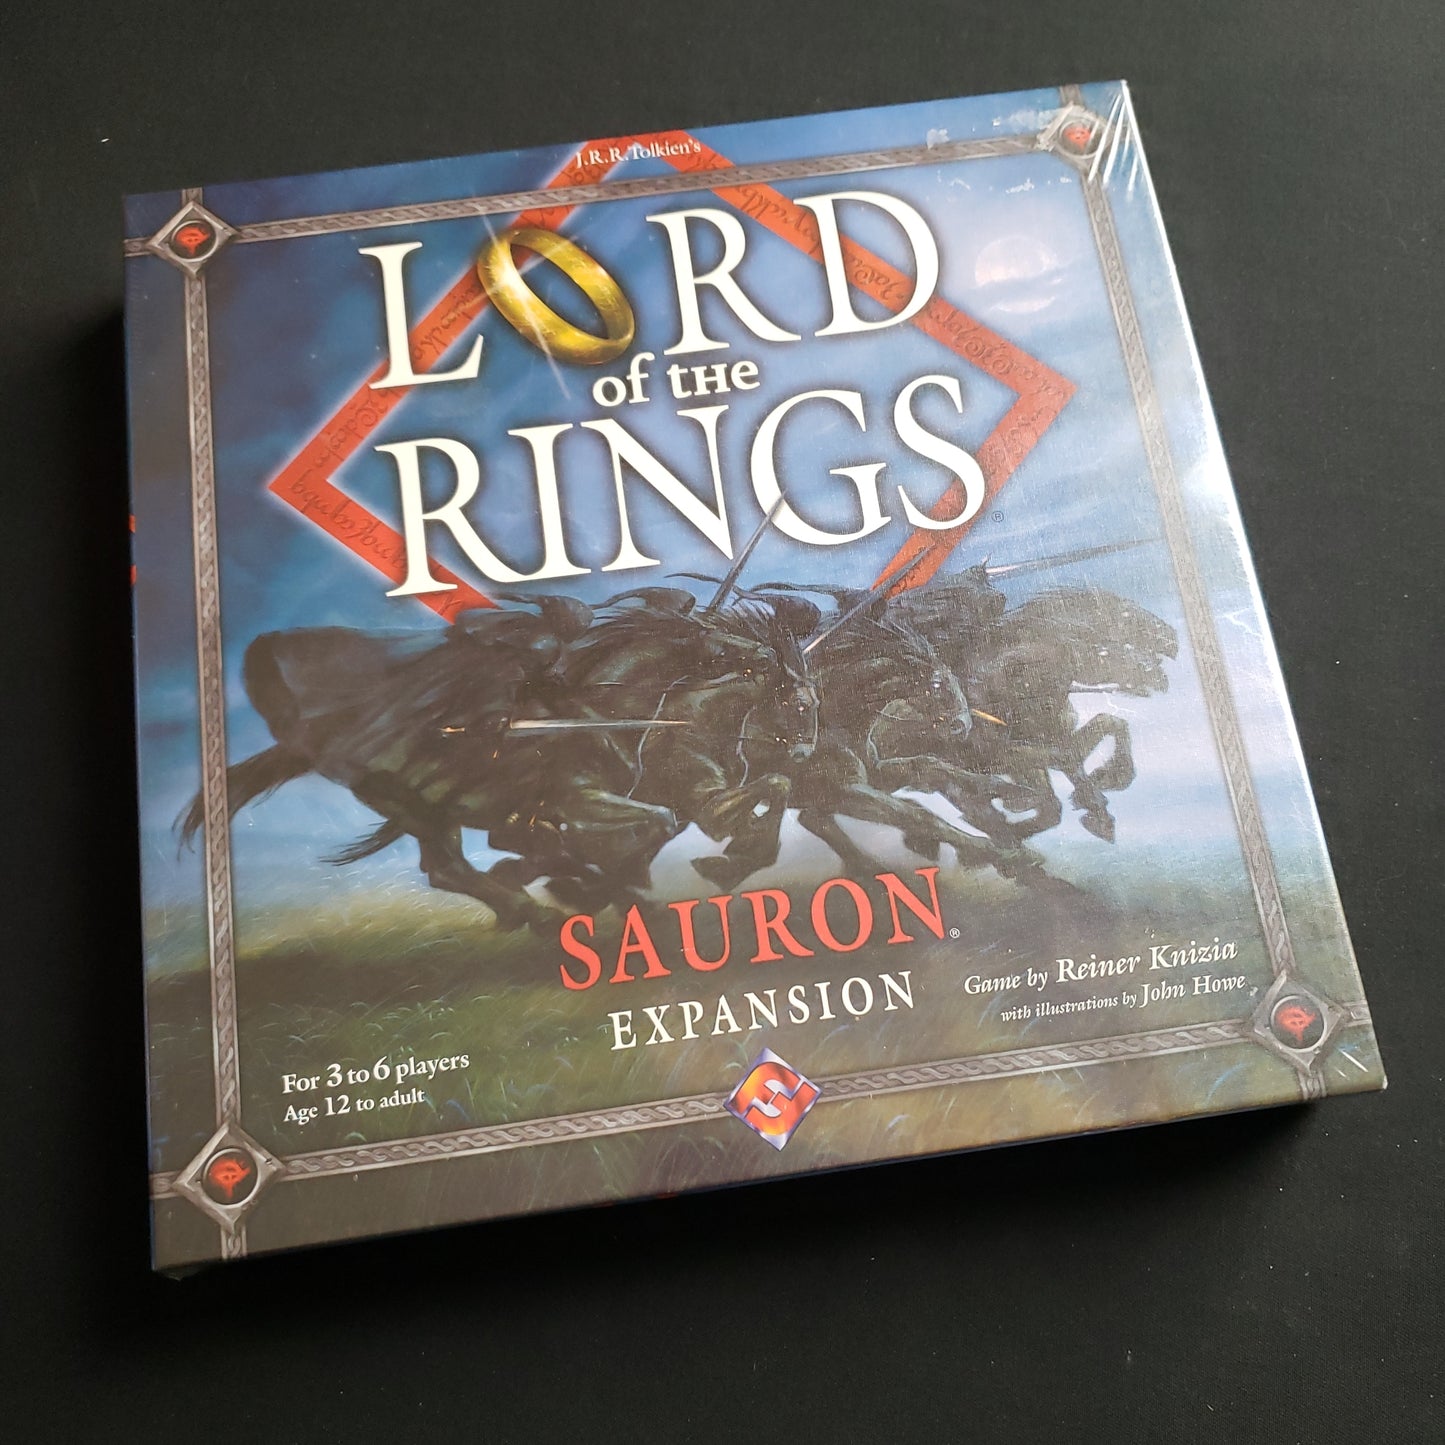 Image shows the front of the box for the Sauron Expansion for the Lord of the Rings board game